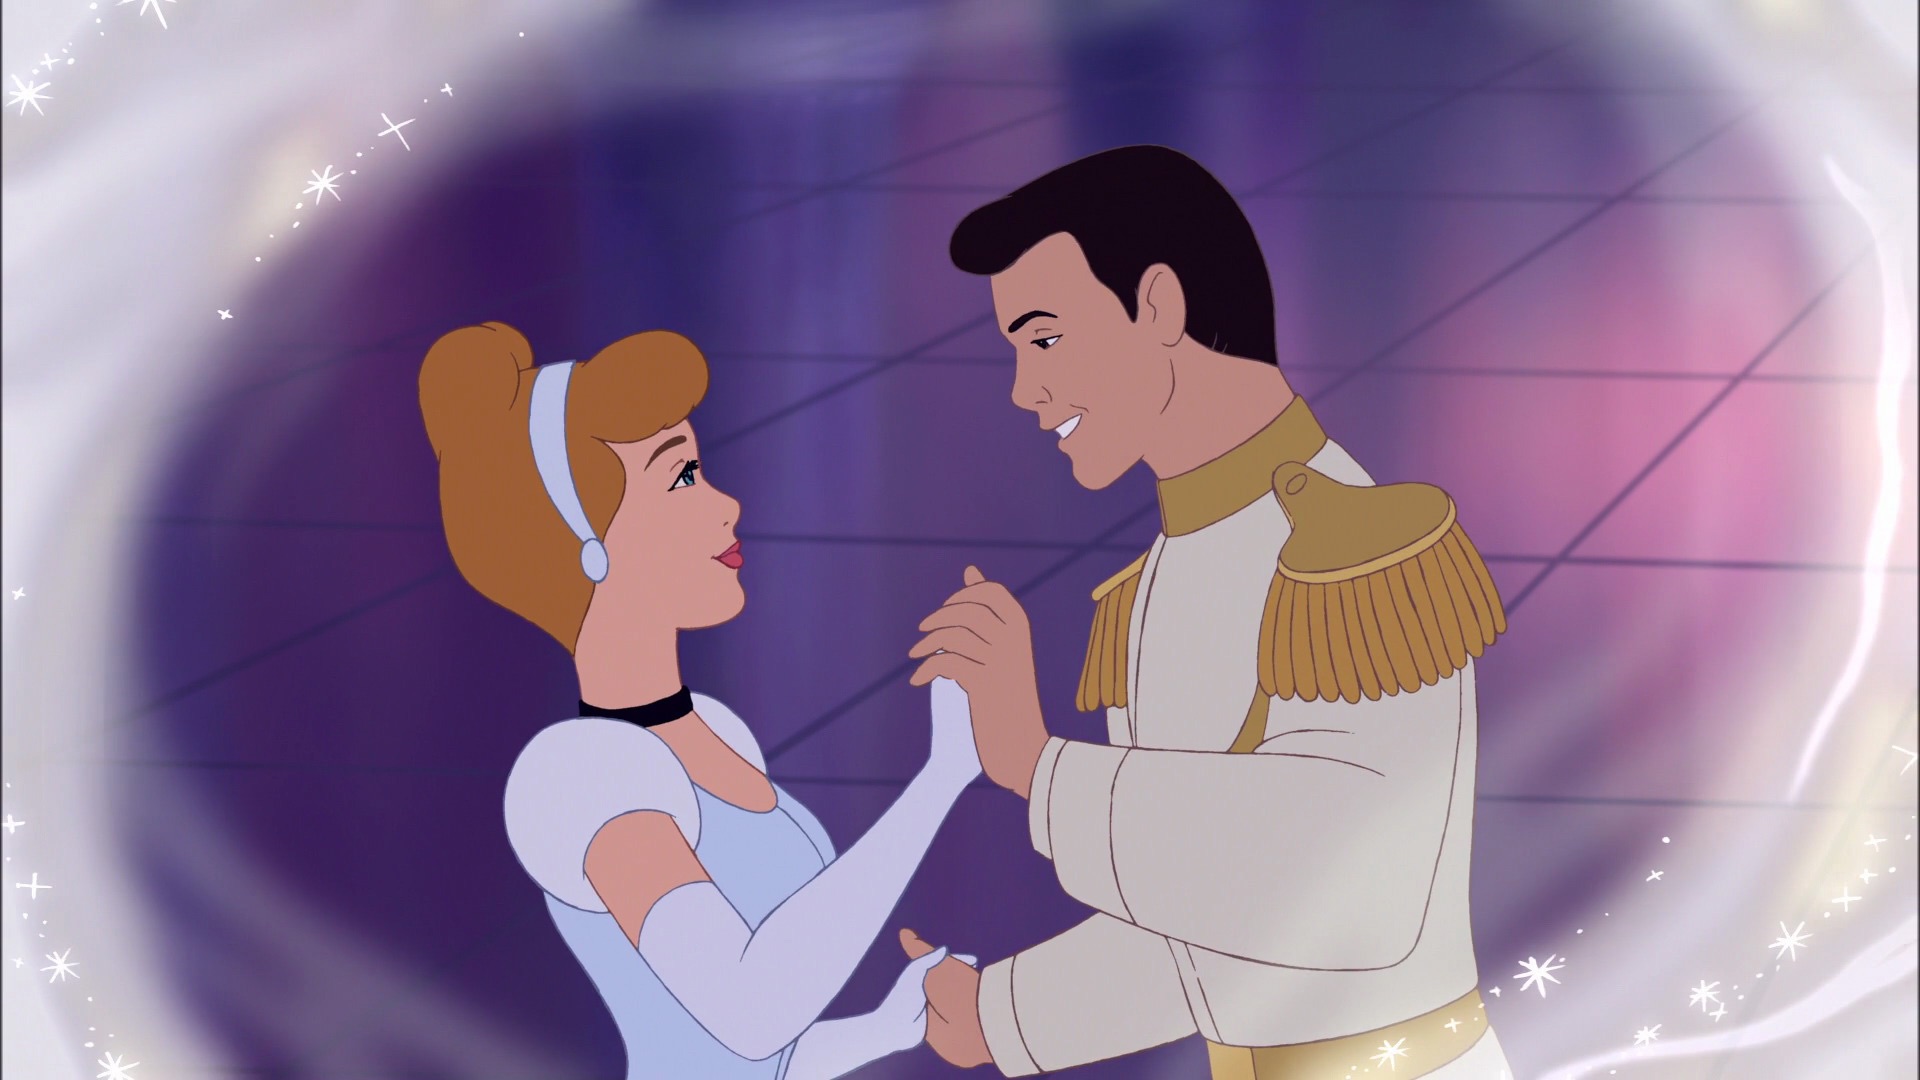 Prince Charming from Cinderella - wide 10